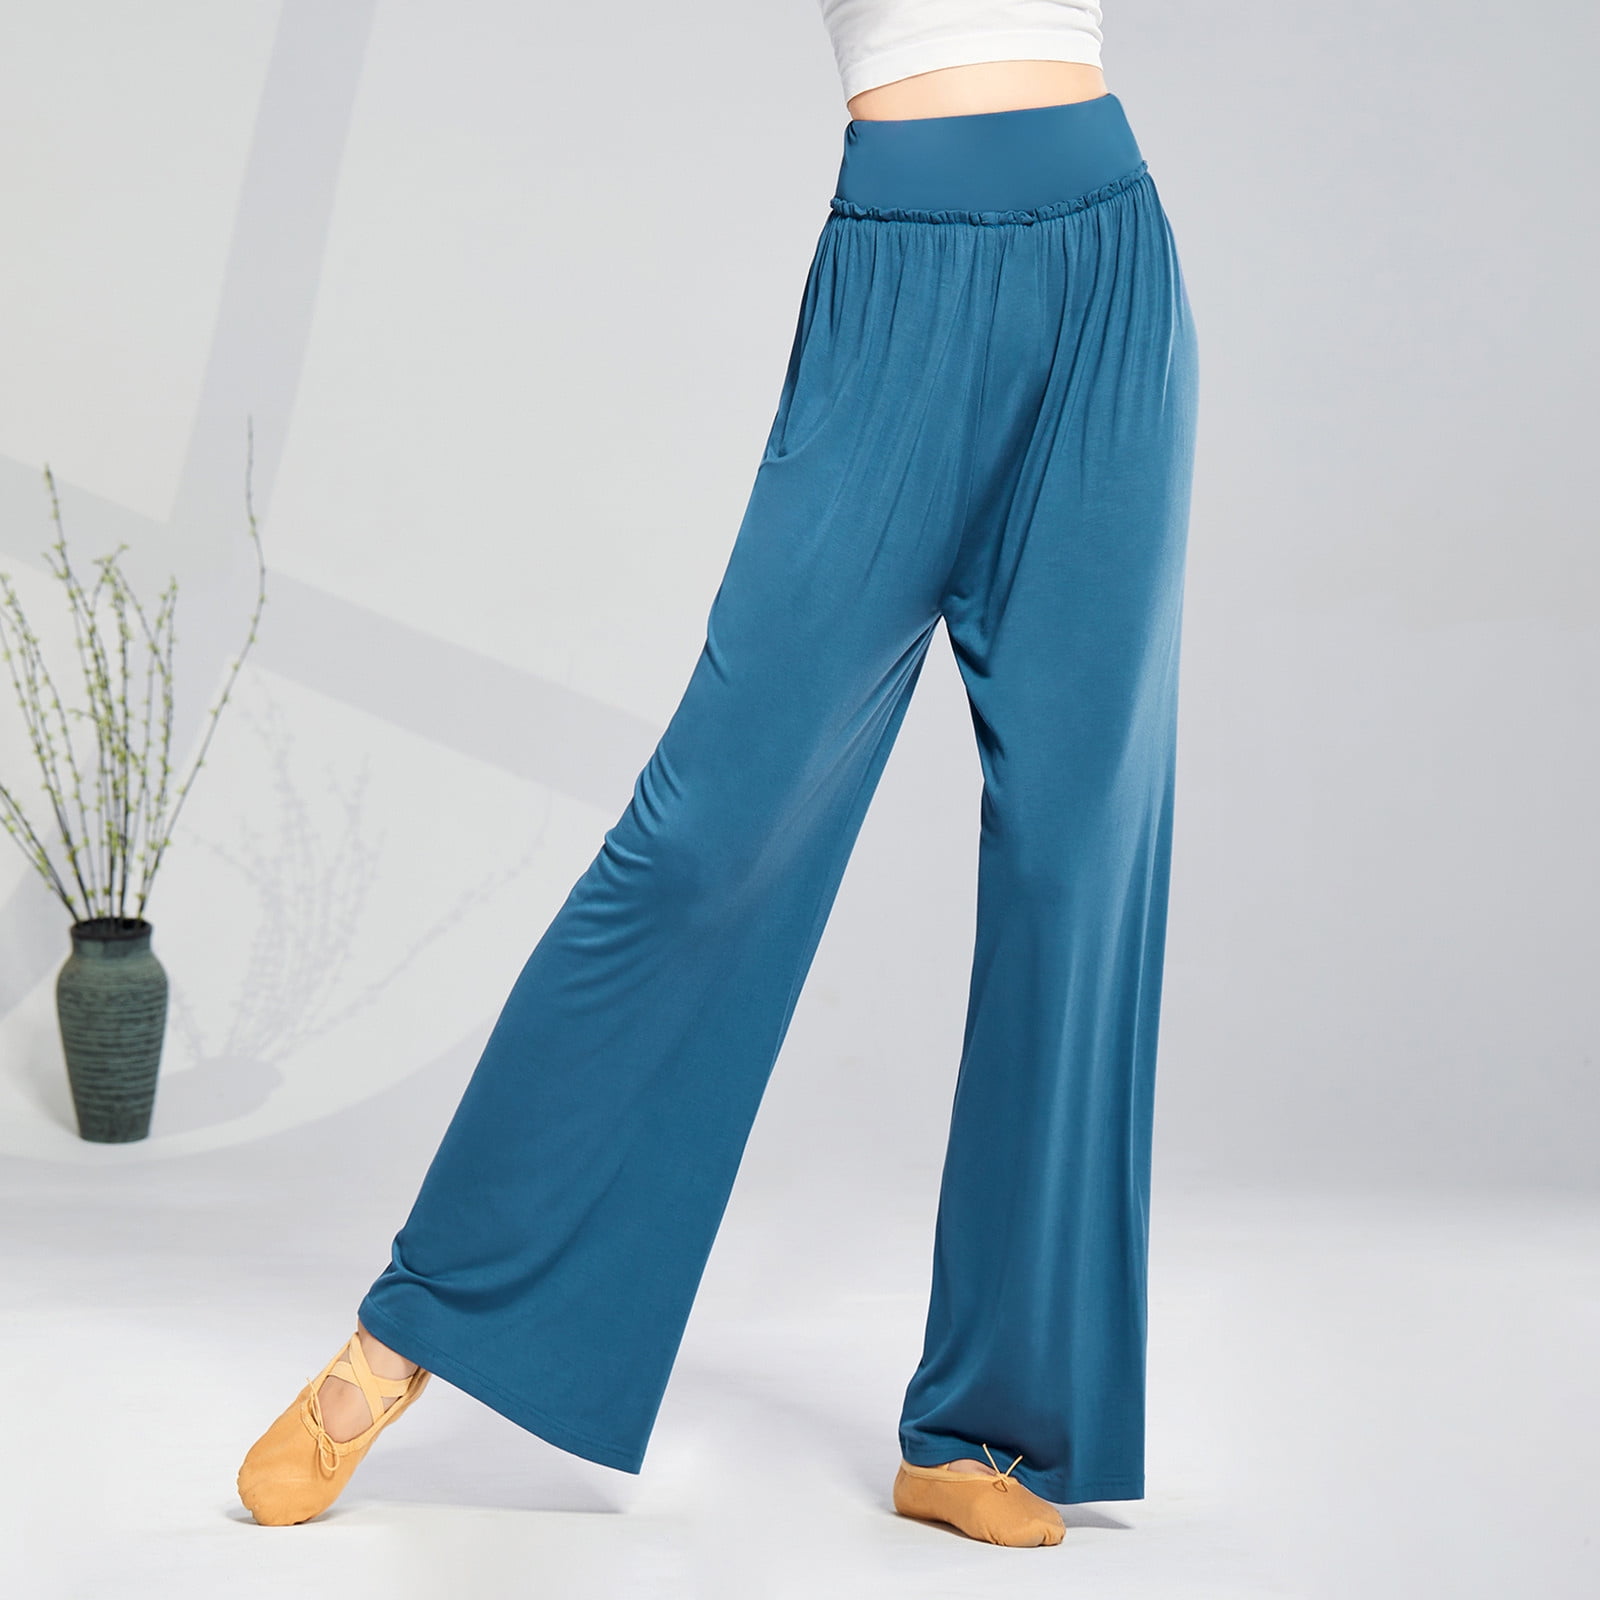 Tuphregyow Women's Cotton Slim Flowy Pants Clearance Trendy Solid  Breathable Classic Elastic Comfy Pants High Waist Stretch Trousers Straight  Leg